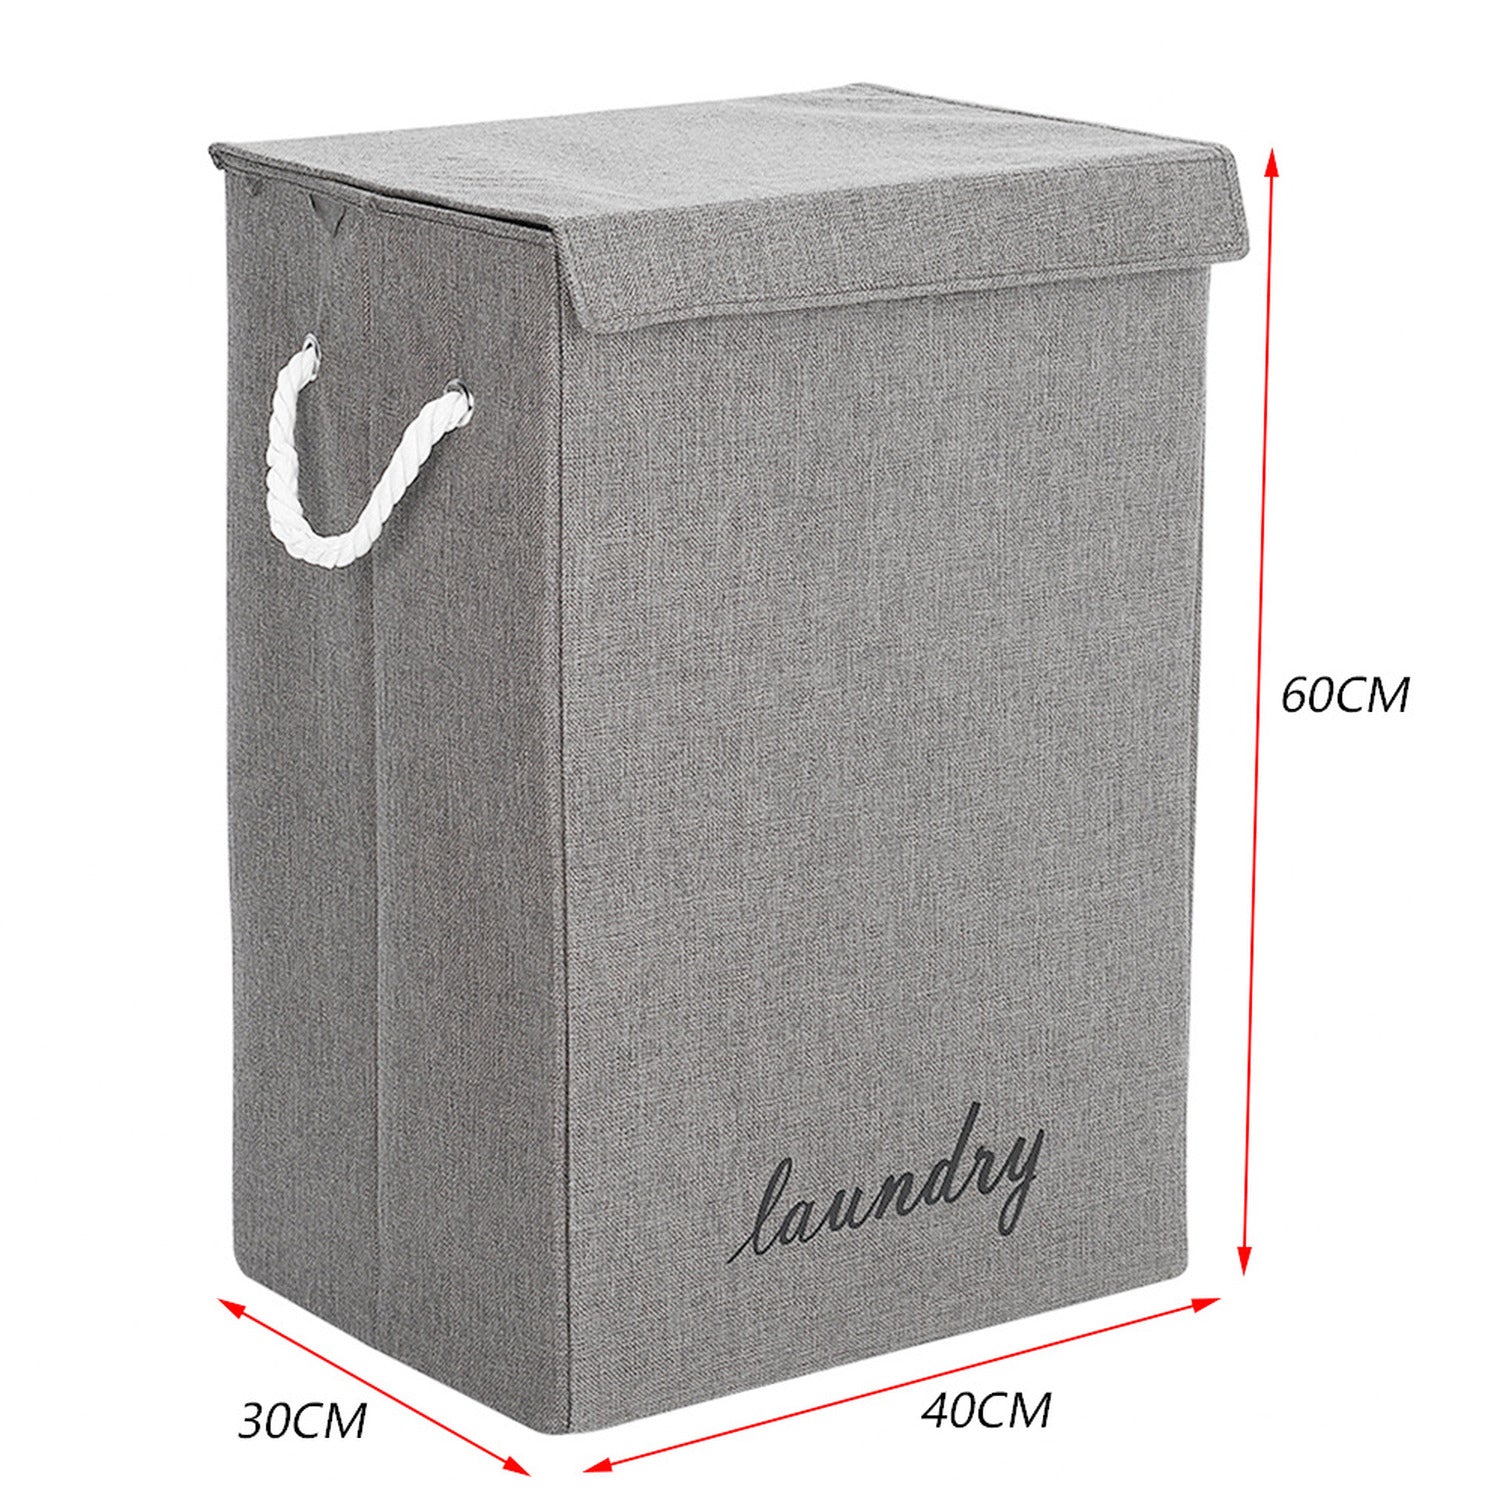 Foldable Linen Laundry Basket 85L Dark Grey with Lid & Rope Handles 35204